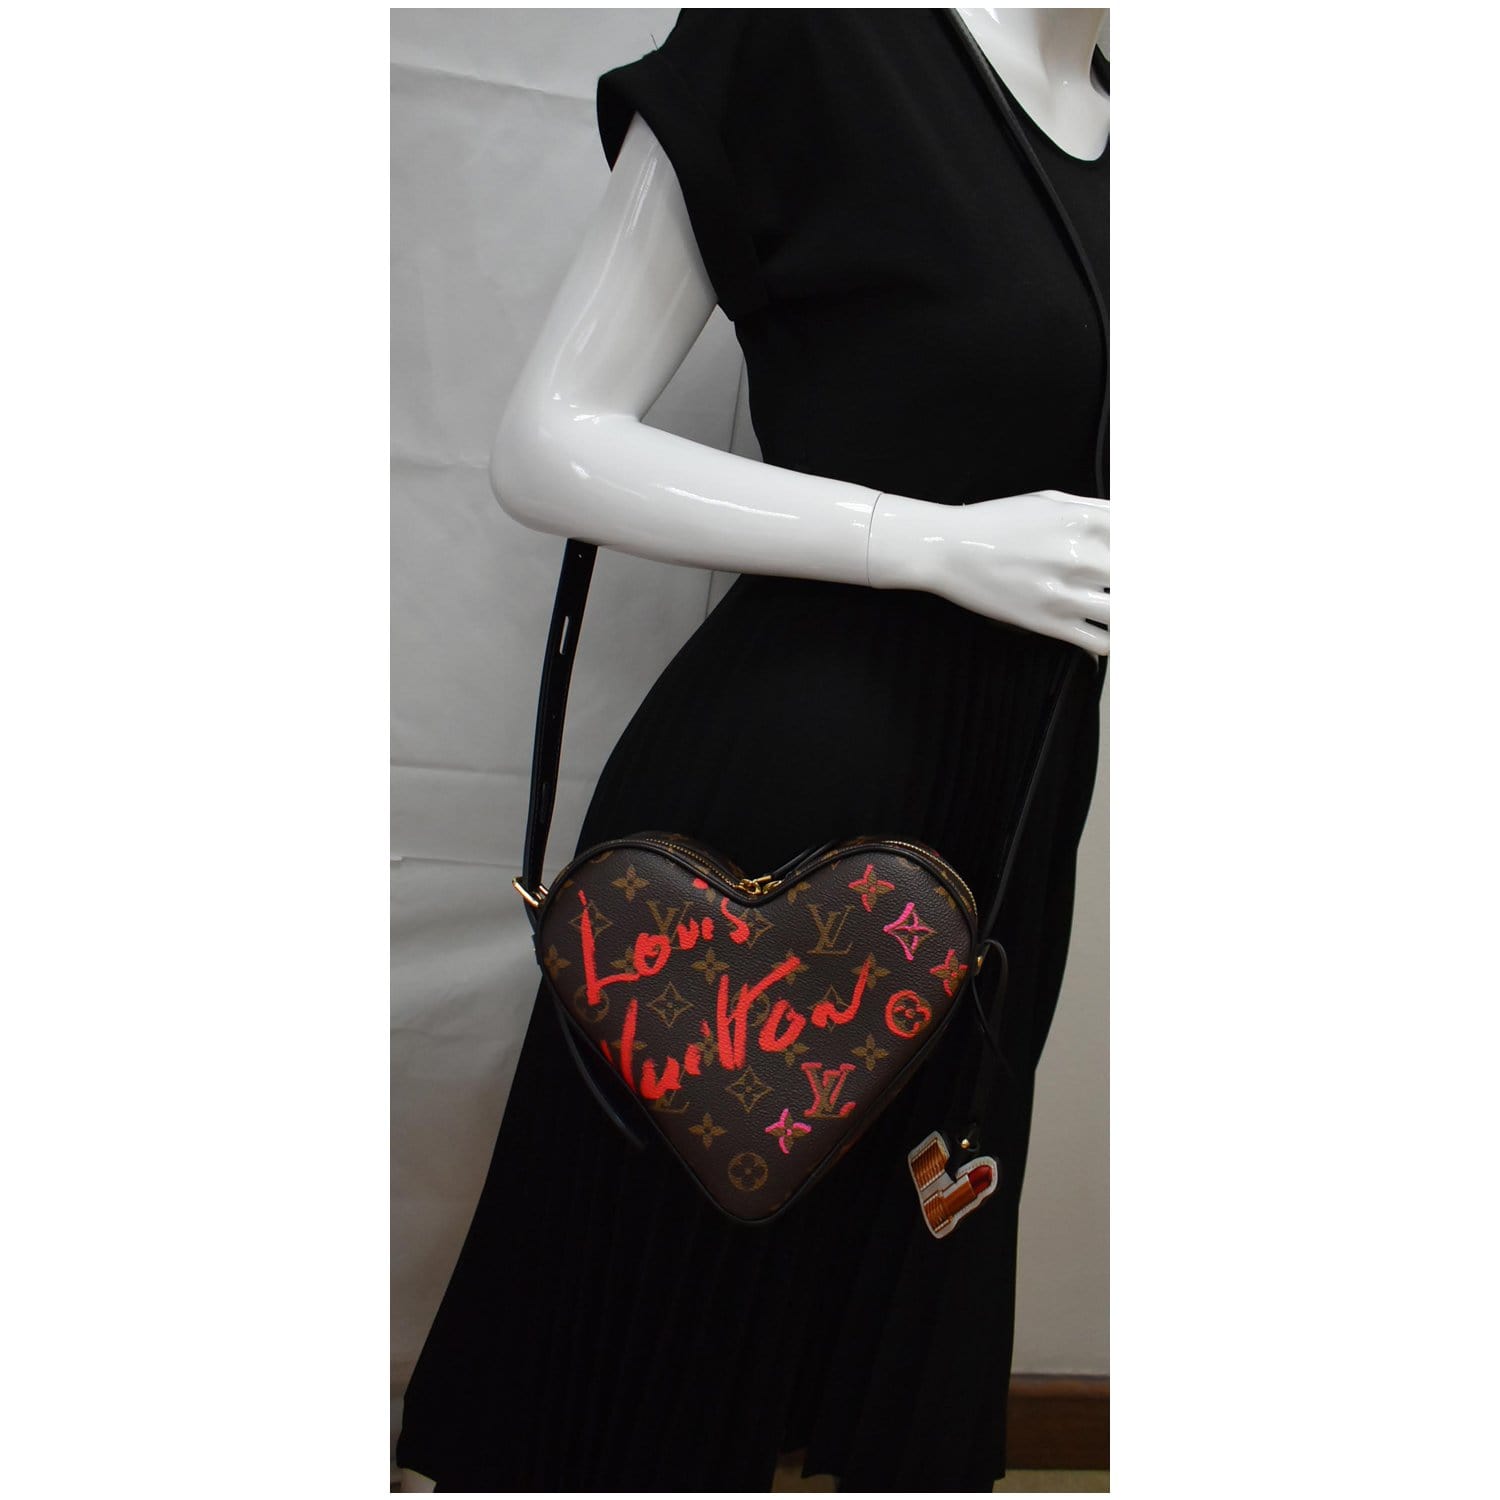 Louis Vuitton Heart Bag - 18 For Sale on 1stDibs  louis vuitton heart  shaped bag, heart bag louis vuitton, louis vuitton coeur heart bag